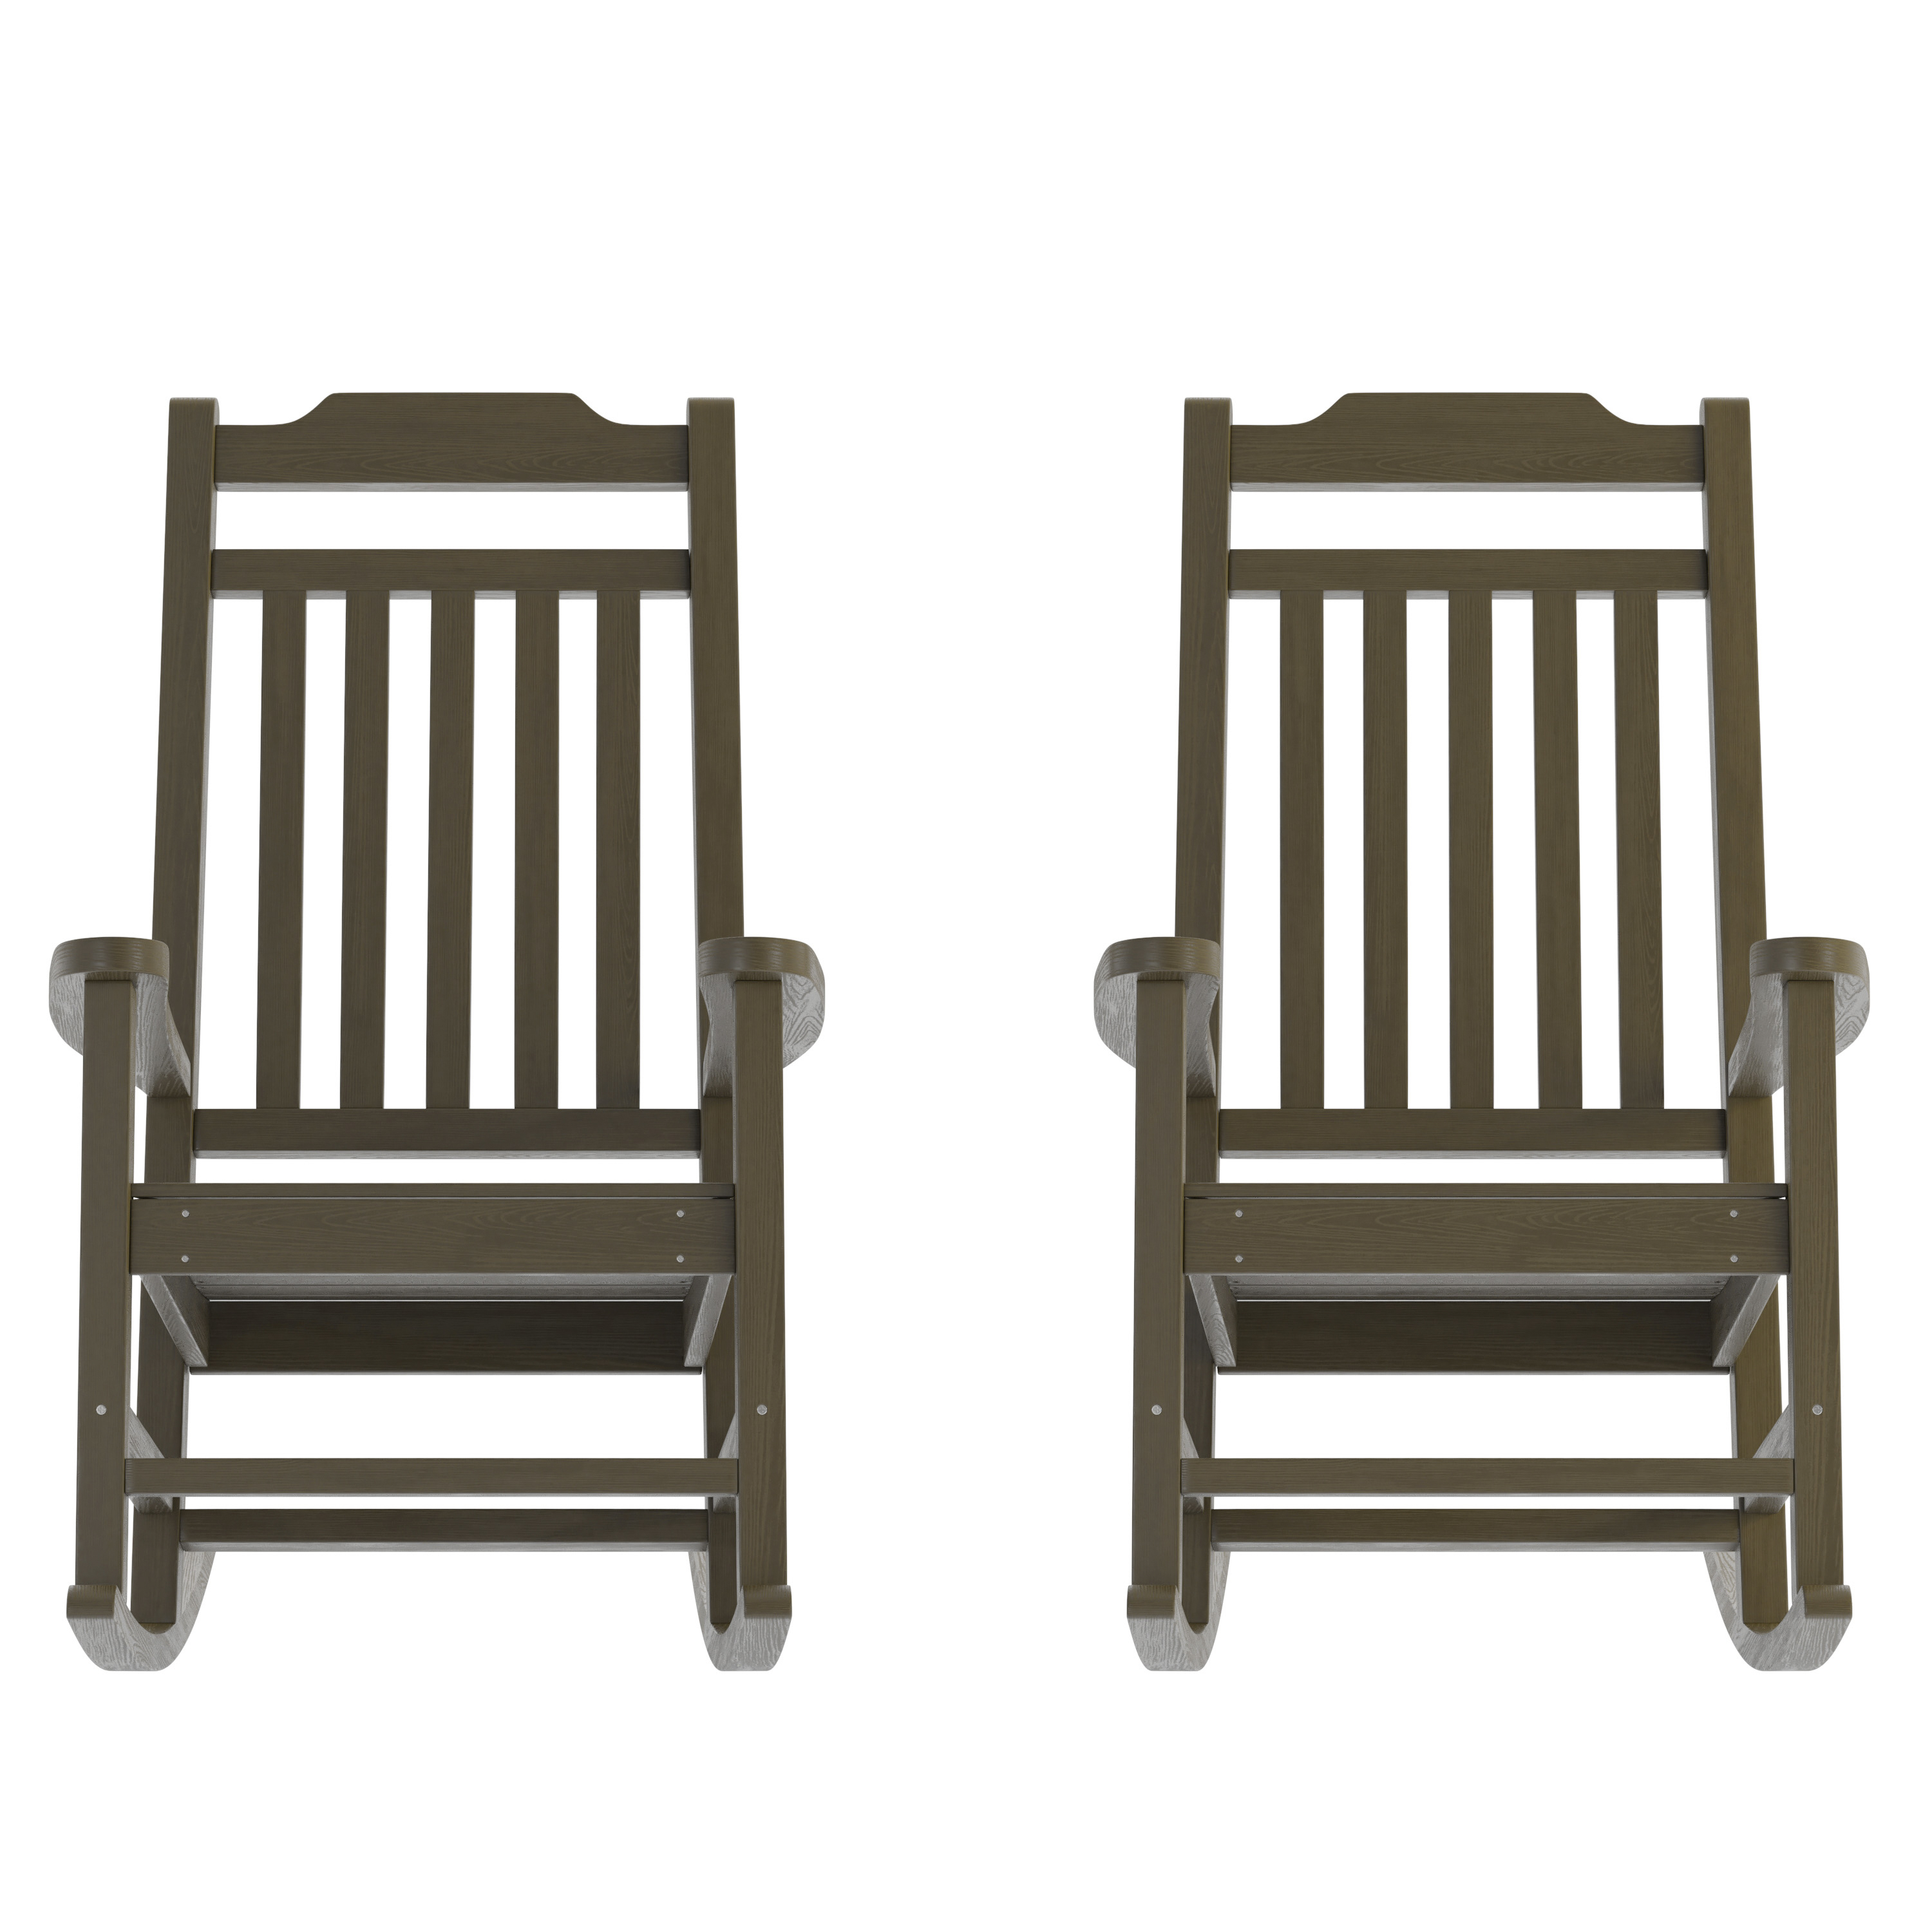 Flash Furniture 2-JJ-C14703-MHG-GG Winston All-Weather Mahogany Faux Wood Rocking Chair, Set of 2